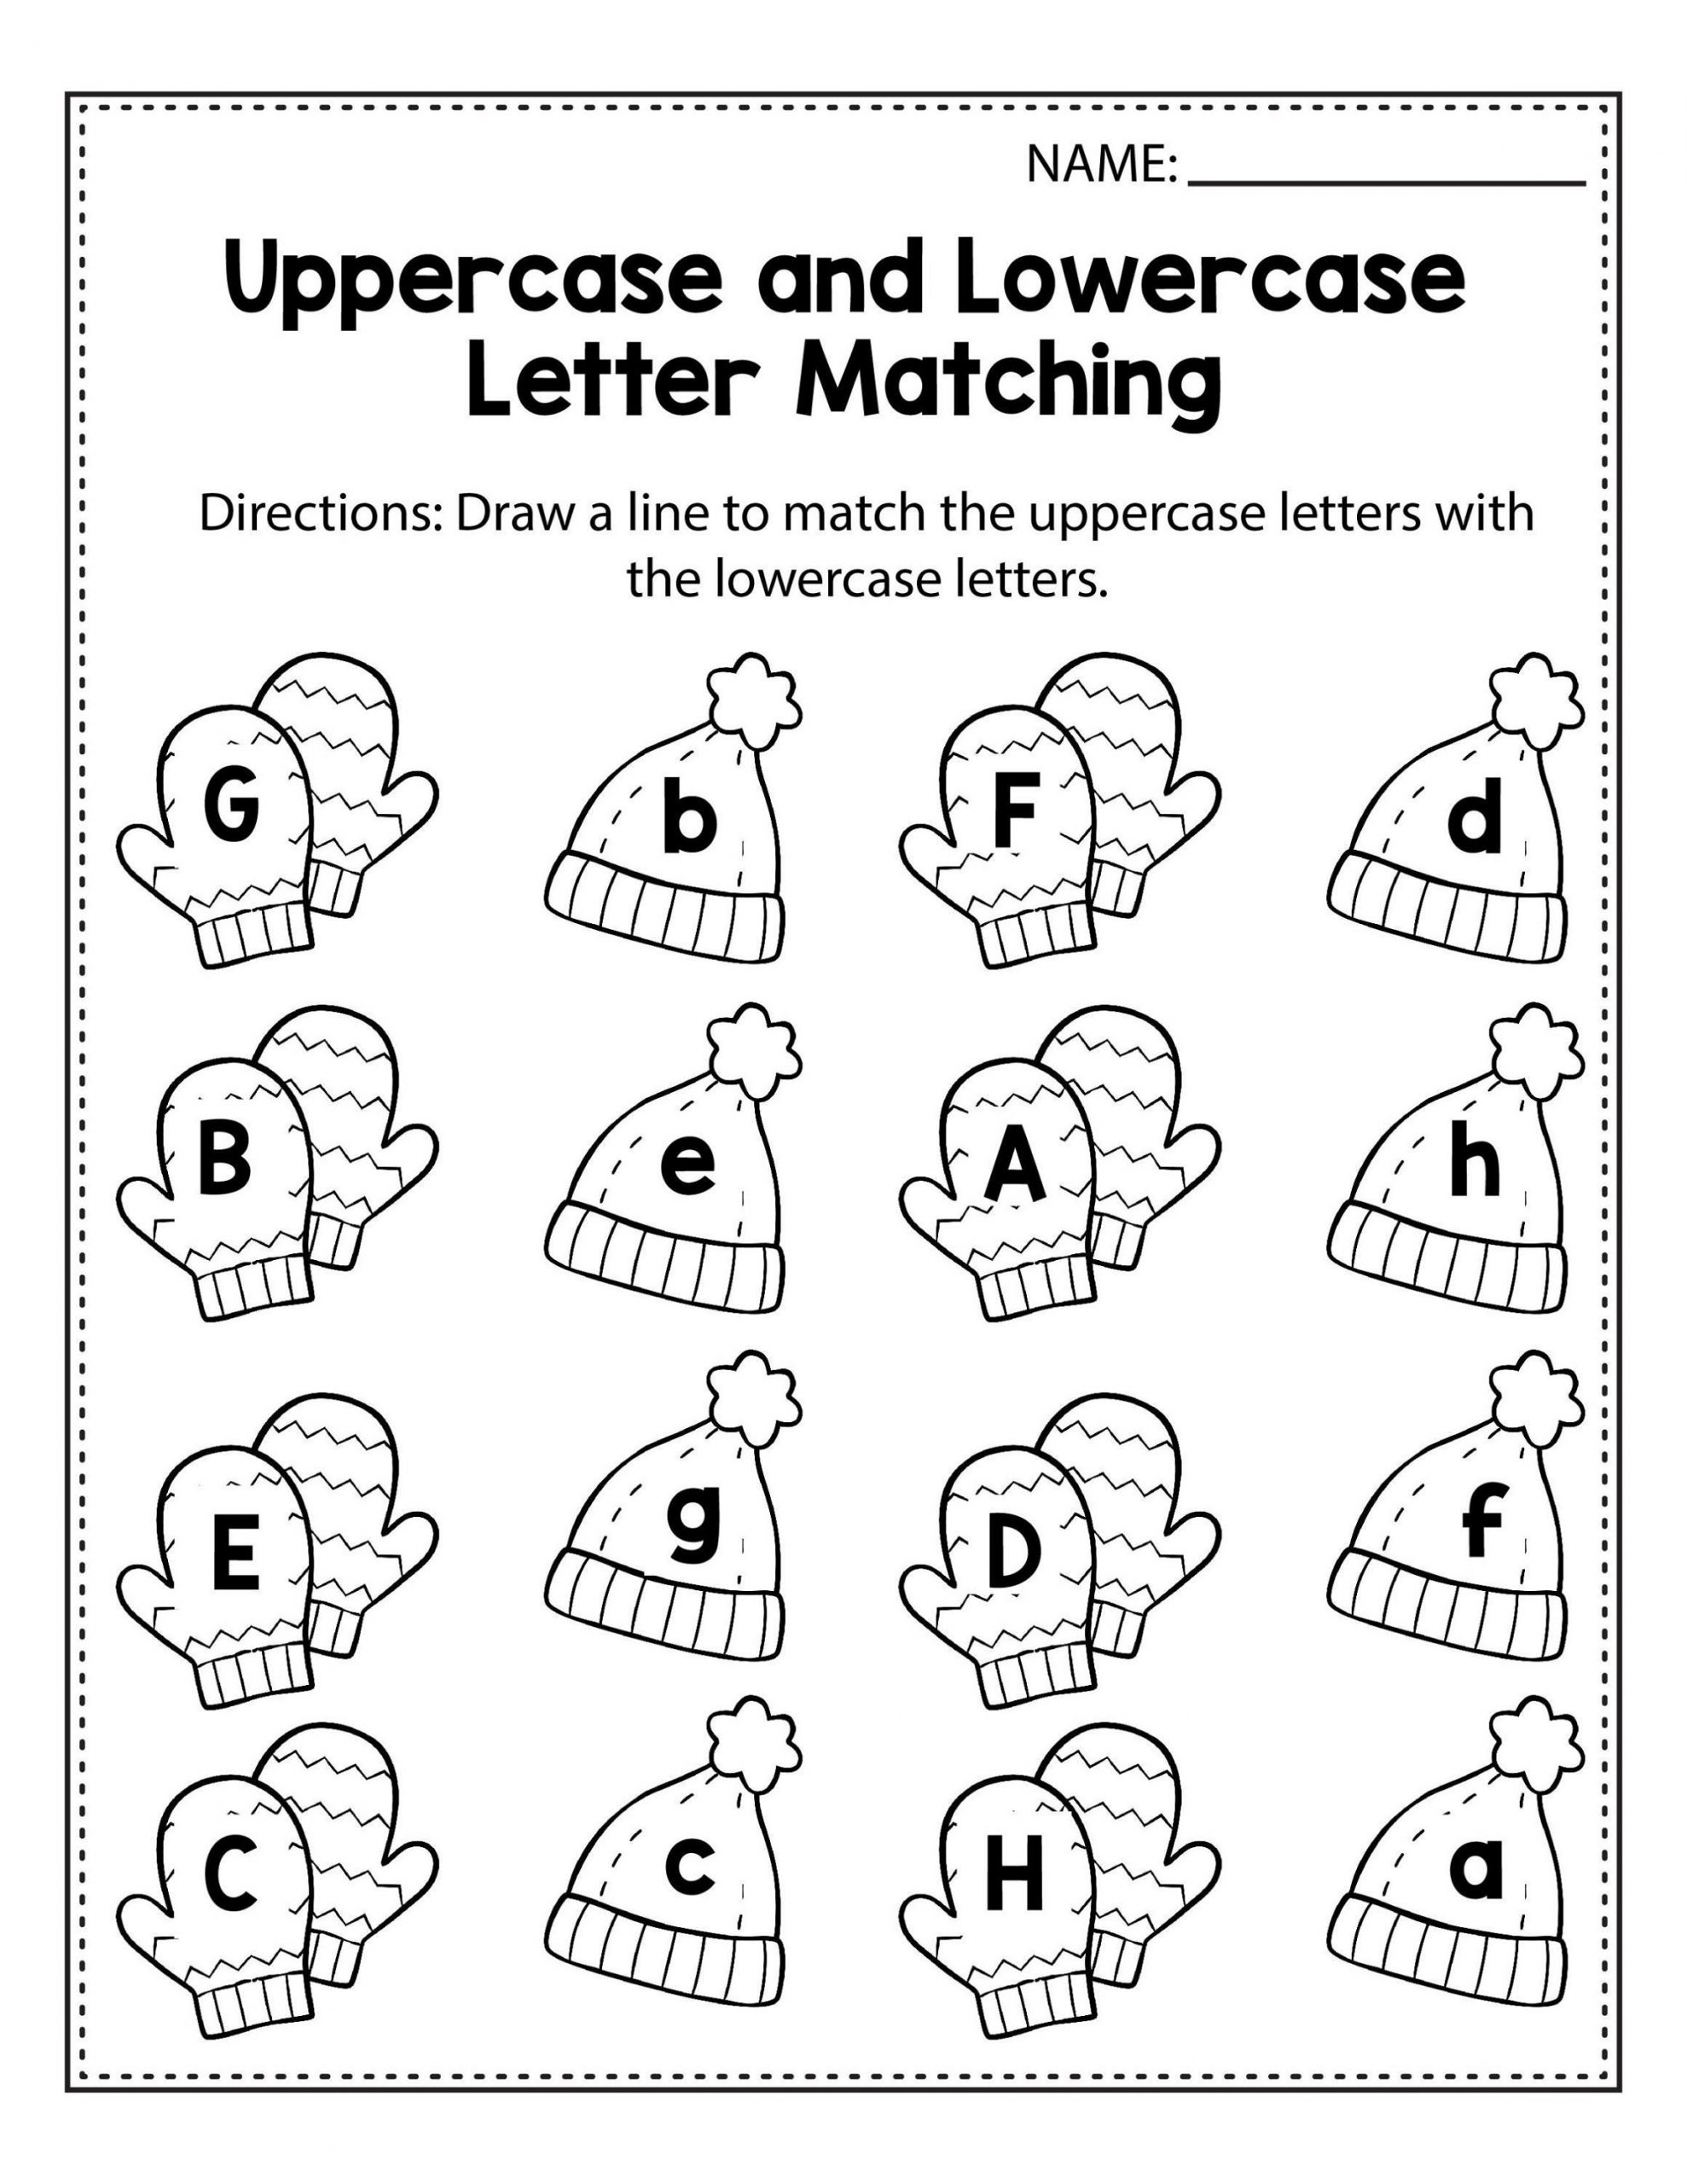 Matching Lowercase Letter Worksheets